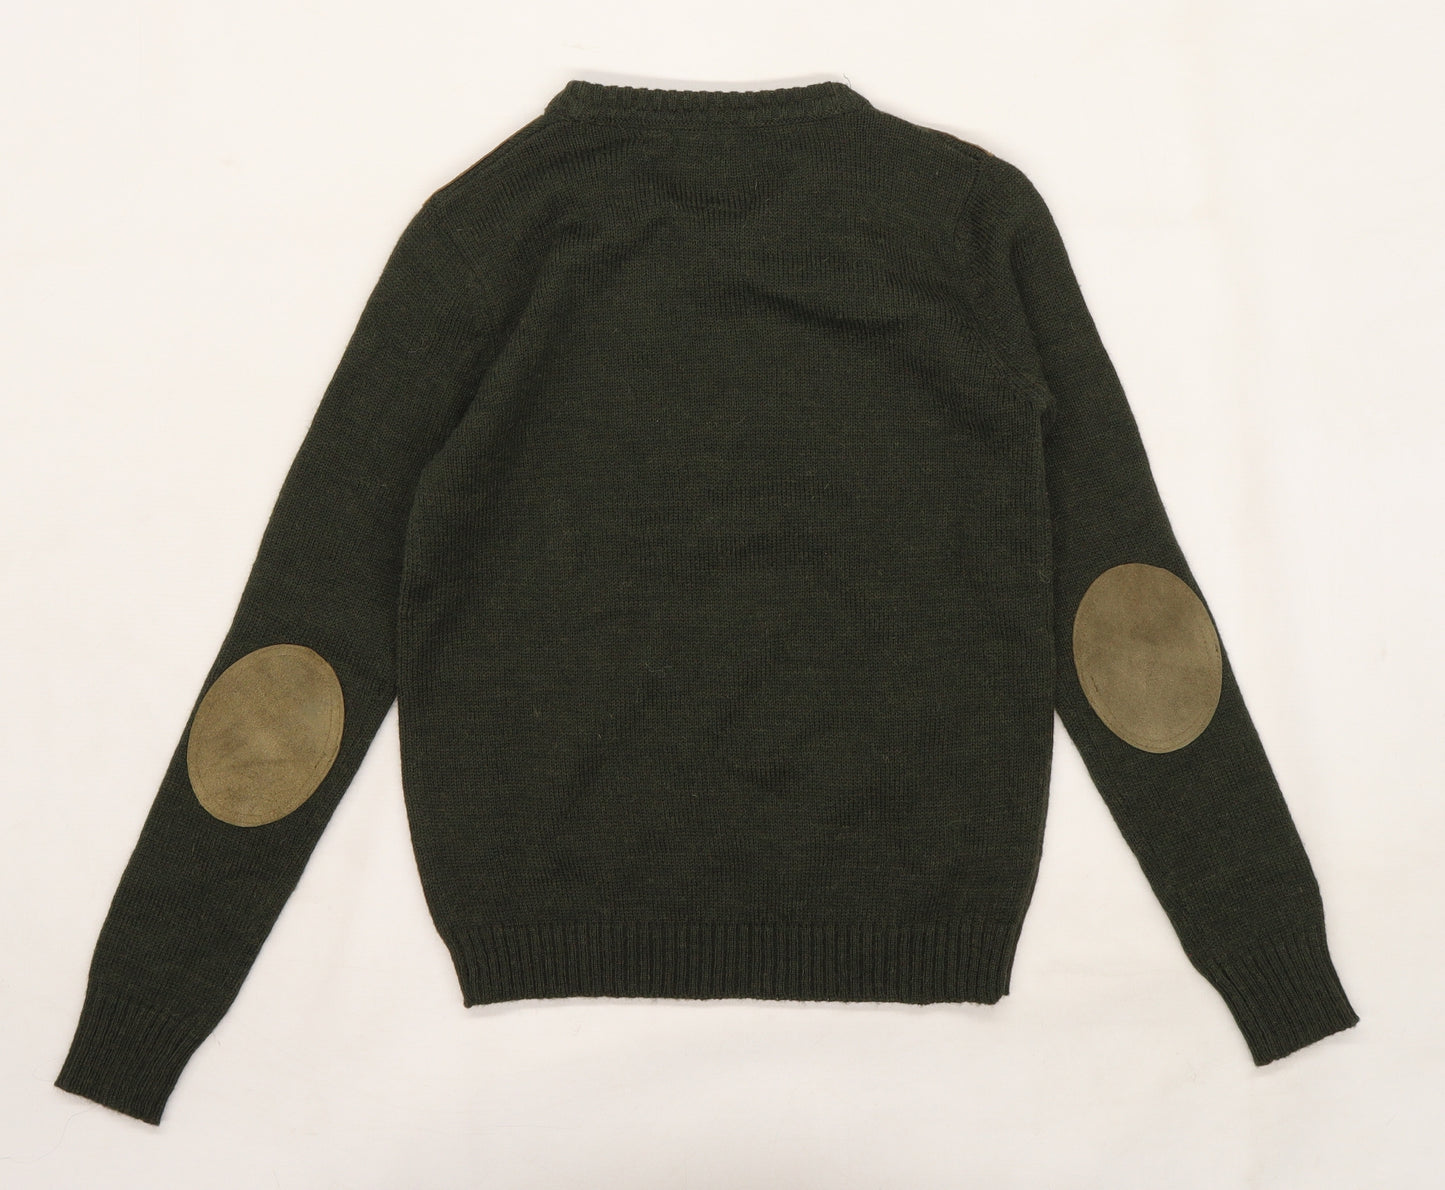 Rydale Boys Green  Knit Pullover Jumper Size 7-8 Years